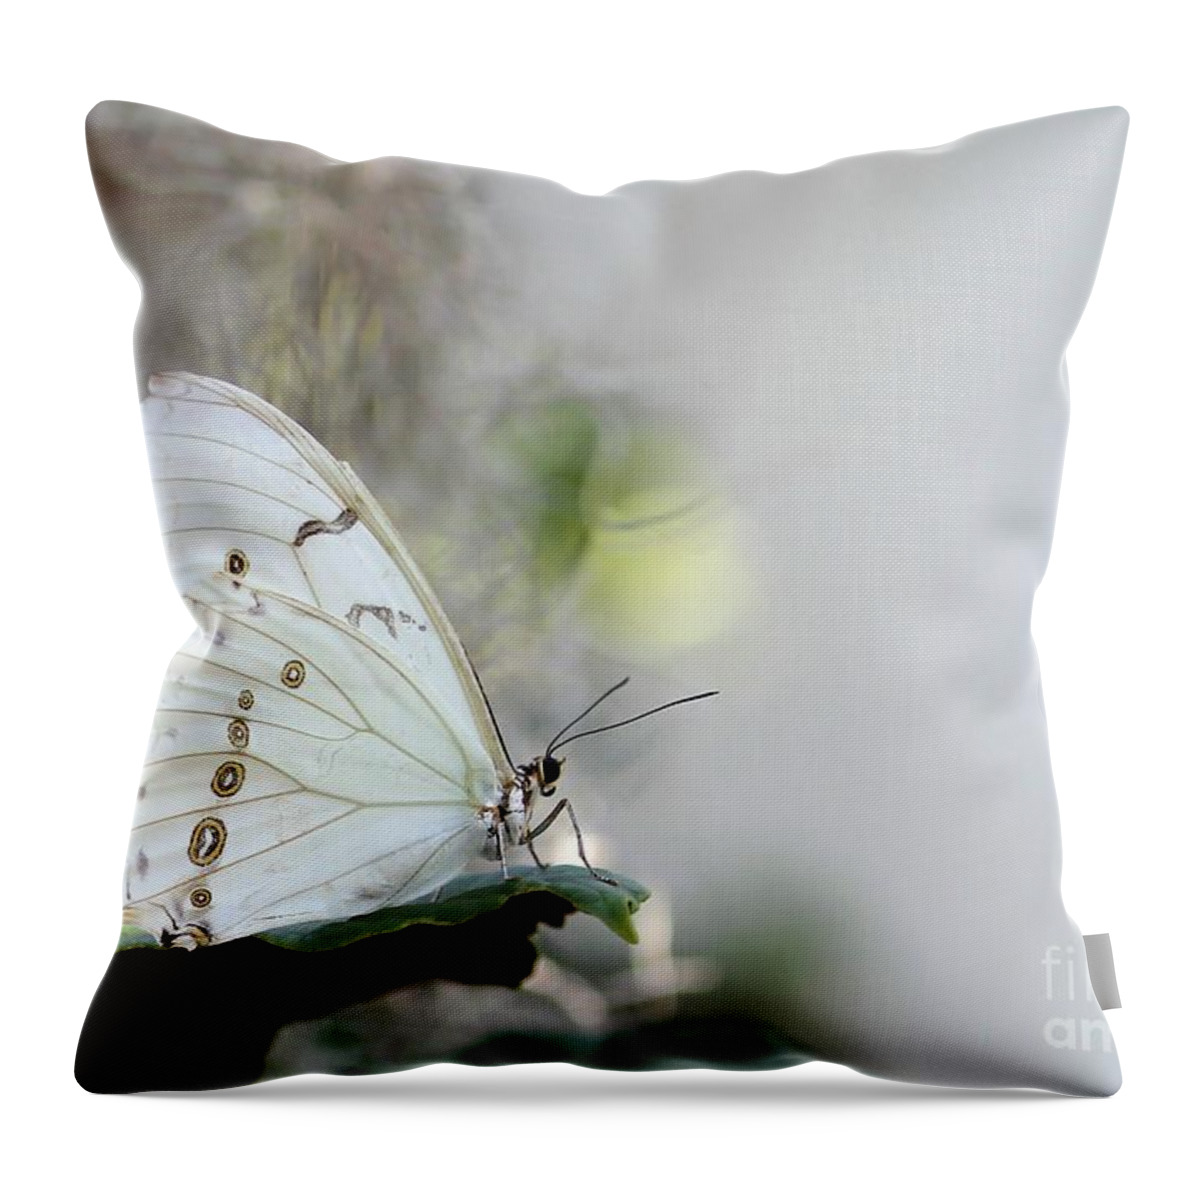 White Throw Pillow featuring the photograph Silent Beauty by Sabrina L Ryan